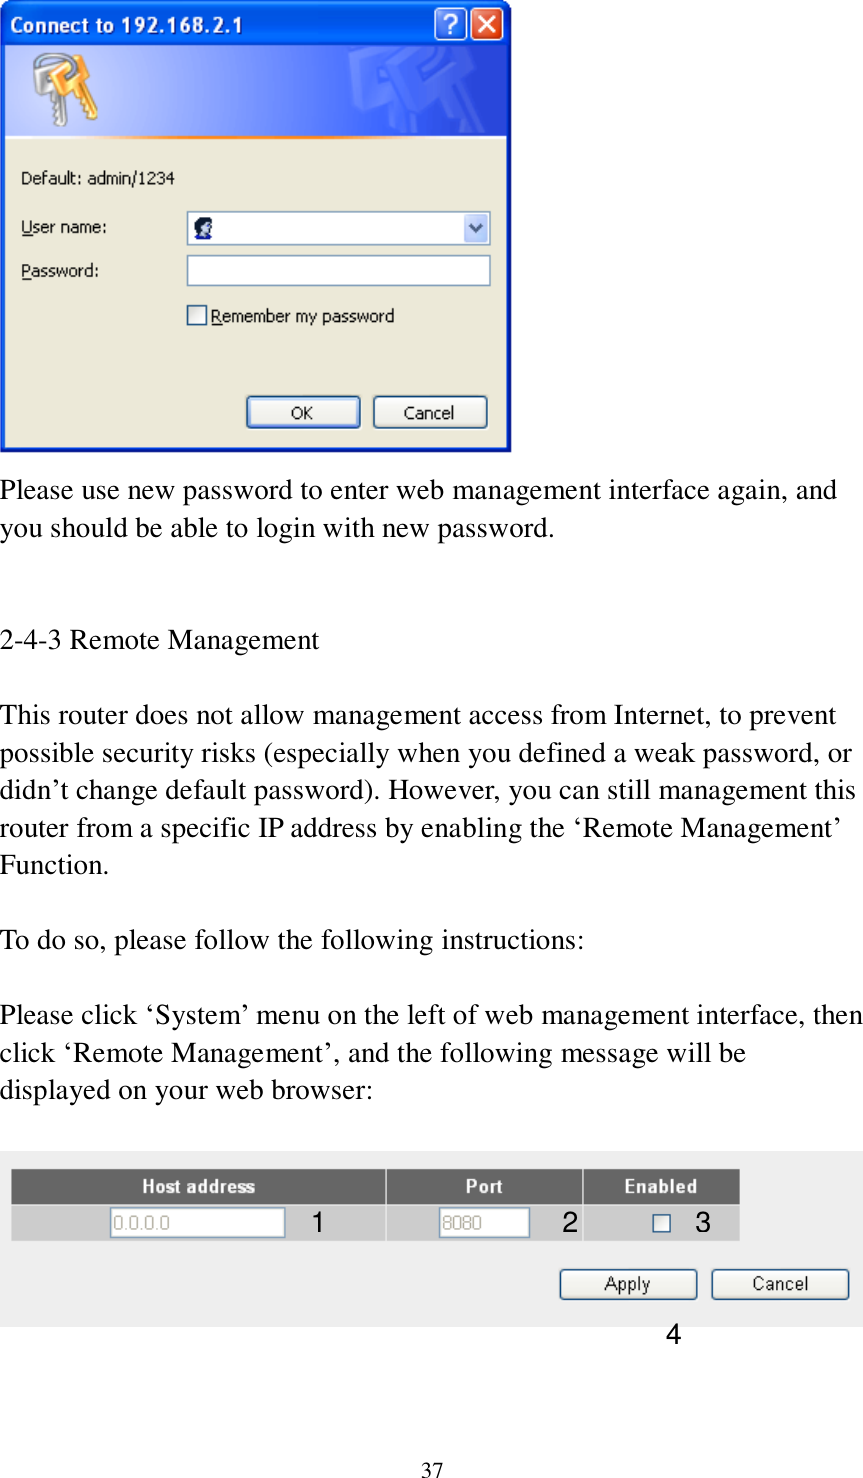 37  Please use new password to enter web management interface again, and you should be able to login with new password.   2-4-3 Remote Management  This router does not allow management access from Internet, to prevent possible security risks (especially when you defined a weak password, or didn‟t change default password). However, you can still management this router from a specific IP address by enabling the „Remote Management‟ Function.  To do so, please follow the following instructions:  Please click „System‟ menu on the left of web management interface, then click „Remote Management‟, and the following message will be displayed on your web browser:     1 2 3 4 